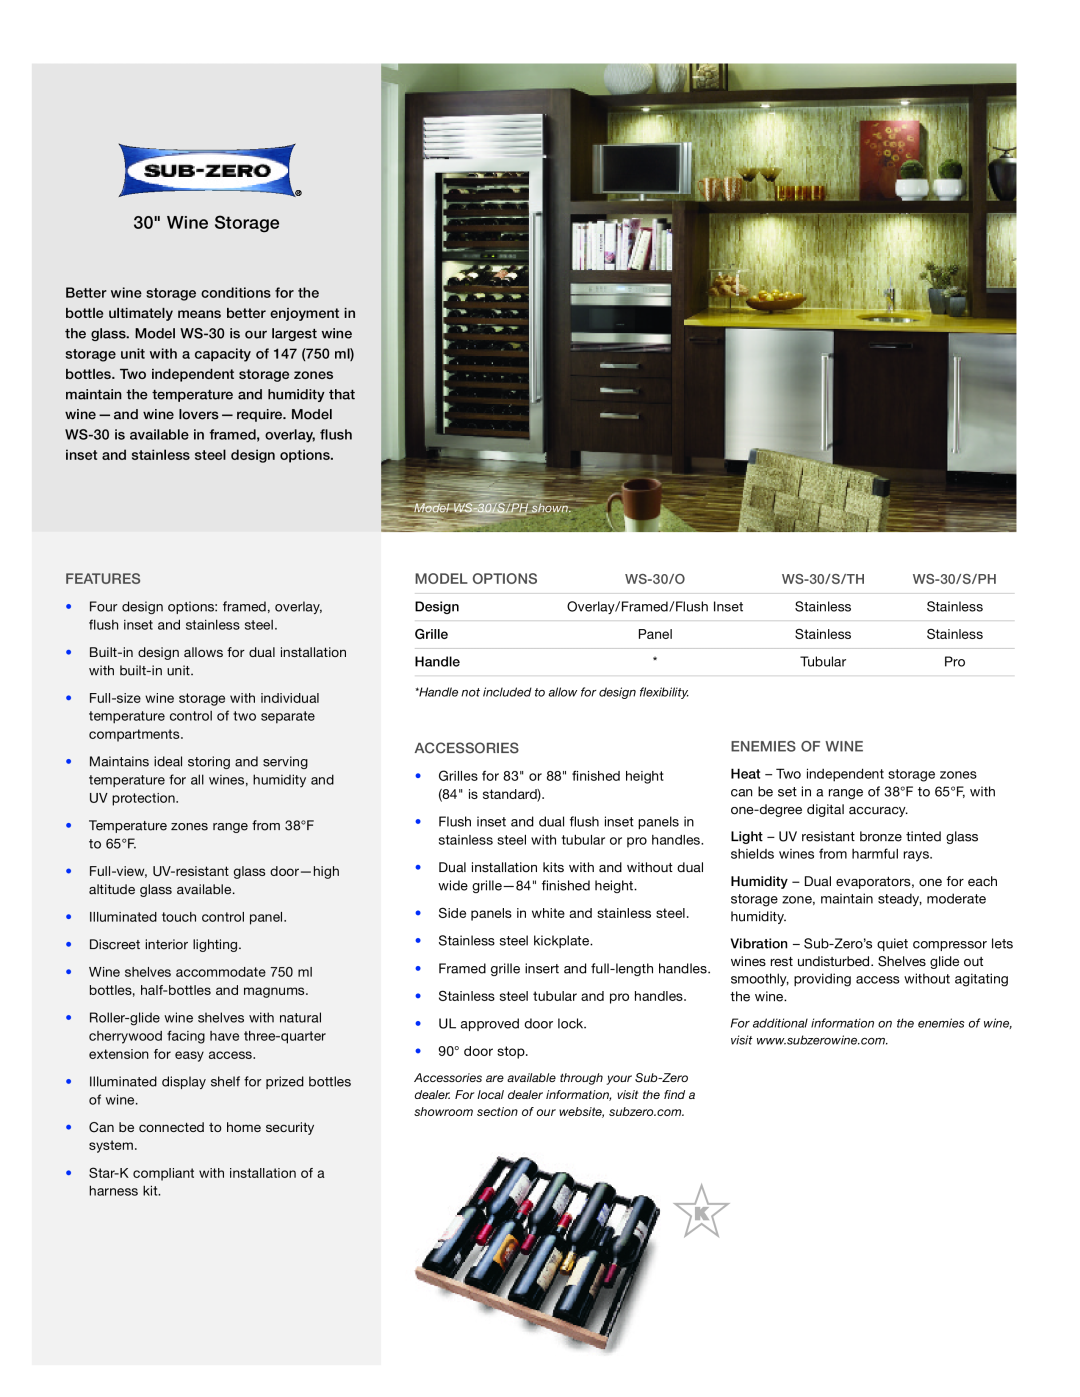 Sub-Zero WS-30/O manual Features, Model Options, Accessories, Enemies Of Wine, Wine Storage, WS-30/S/TH, WS-30/S/PH 